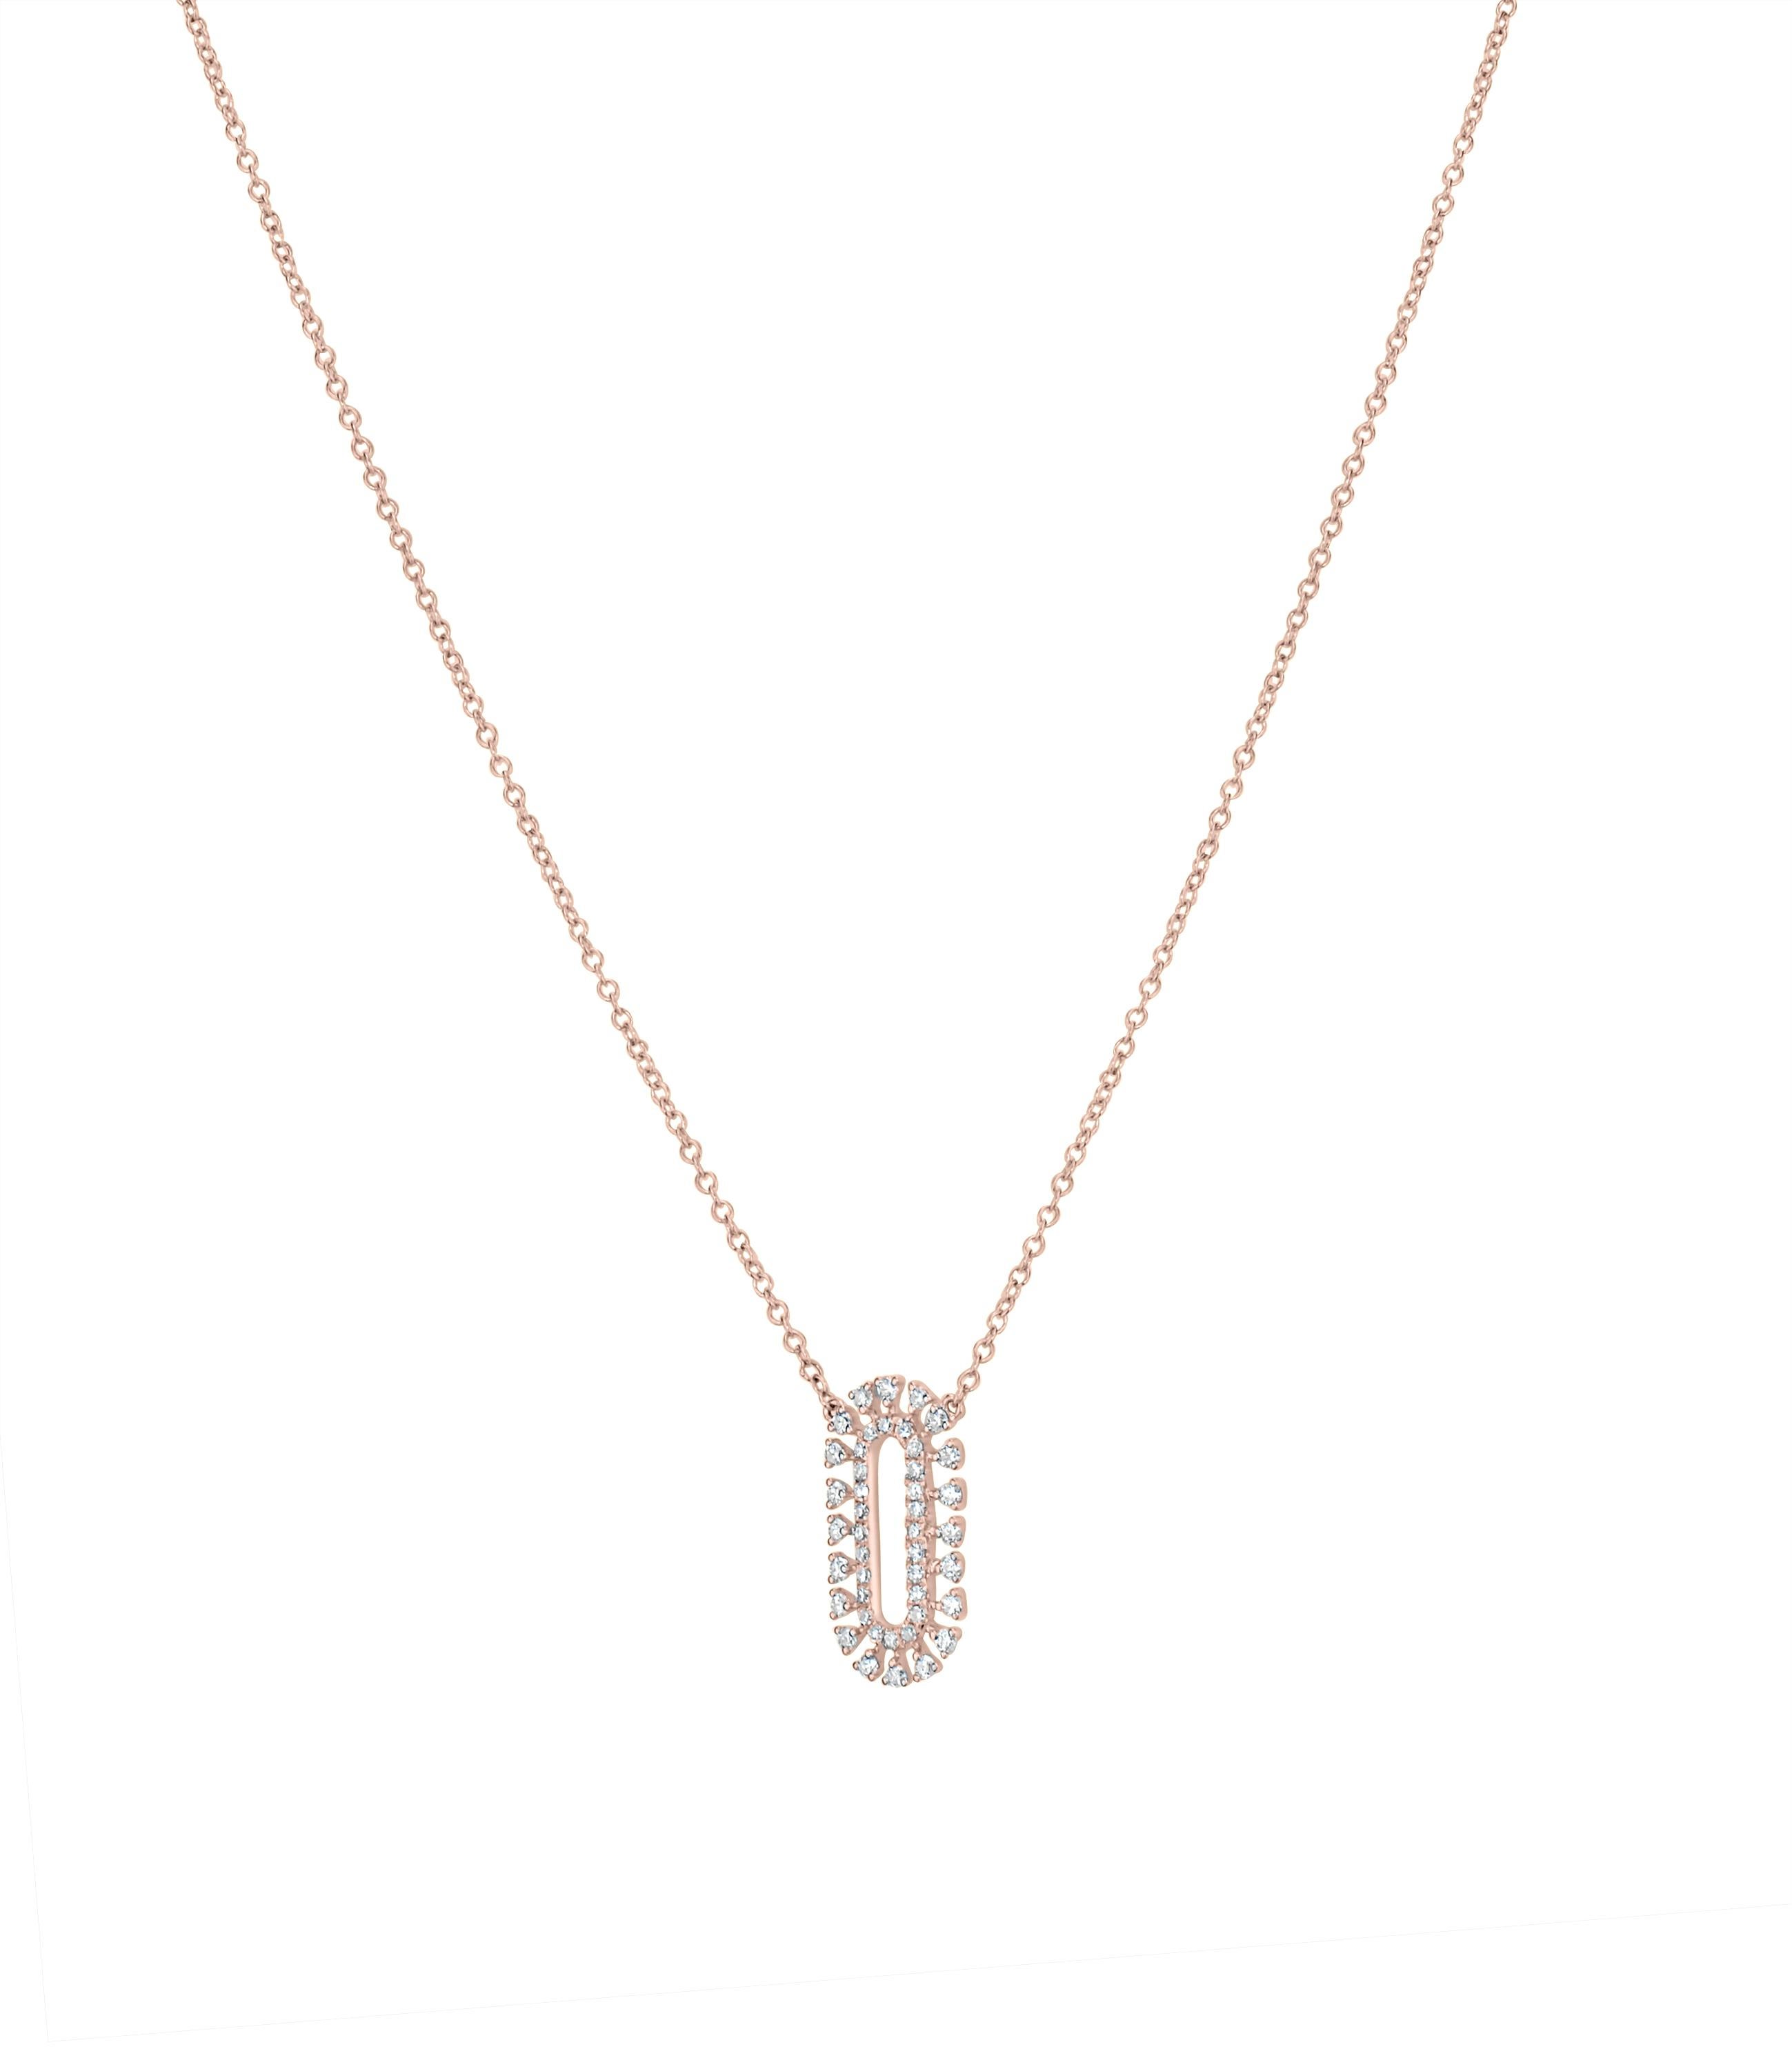 Freshen up your looks with this Luxle delicate necklace featuring an openwork oval pendant embellished with pave set diamonds suspended from a cable chain of 18K rose gold.

Please follow the Luxury Jewels storefront to view the latest collections &